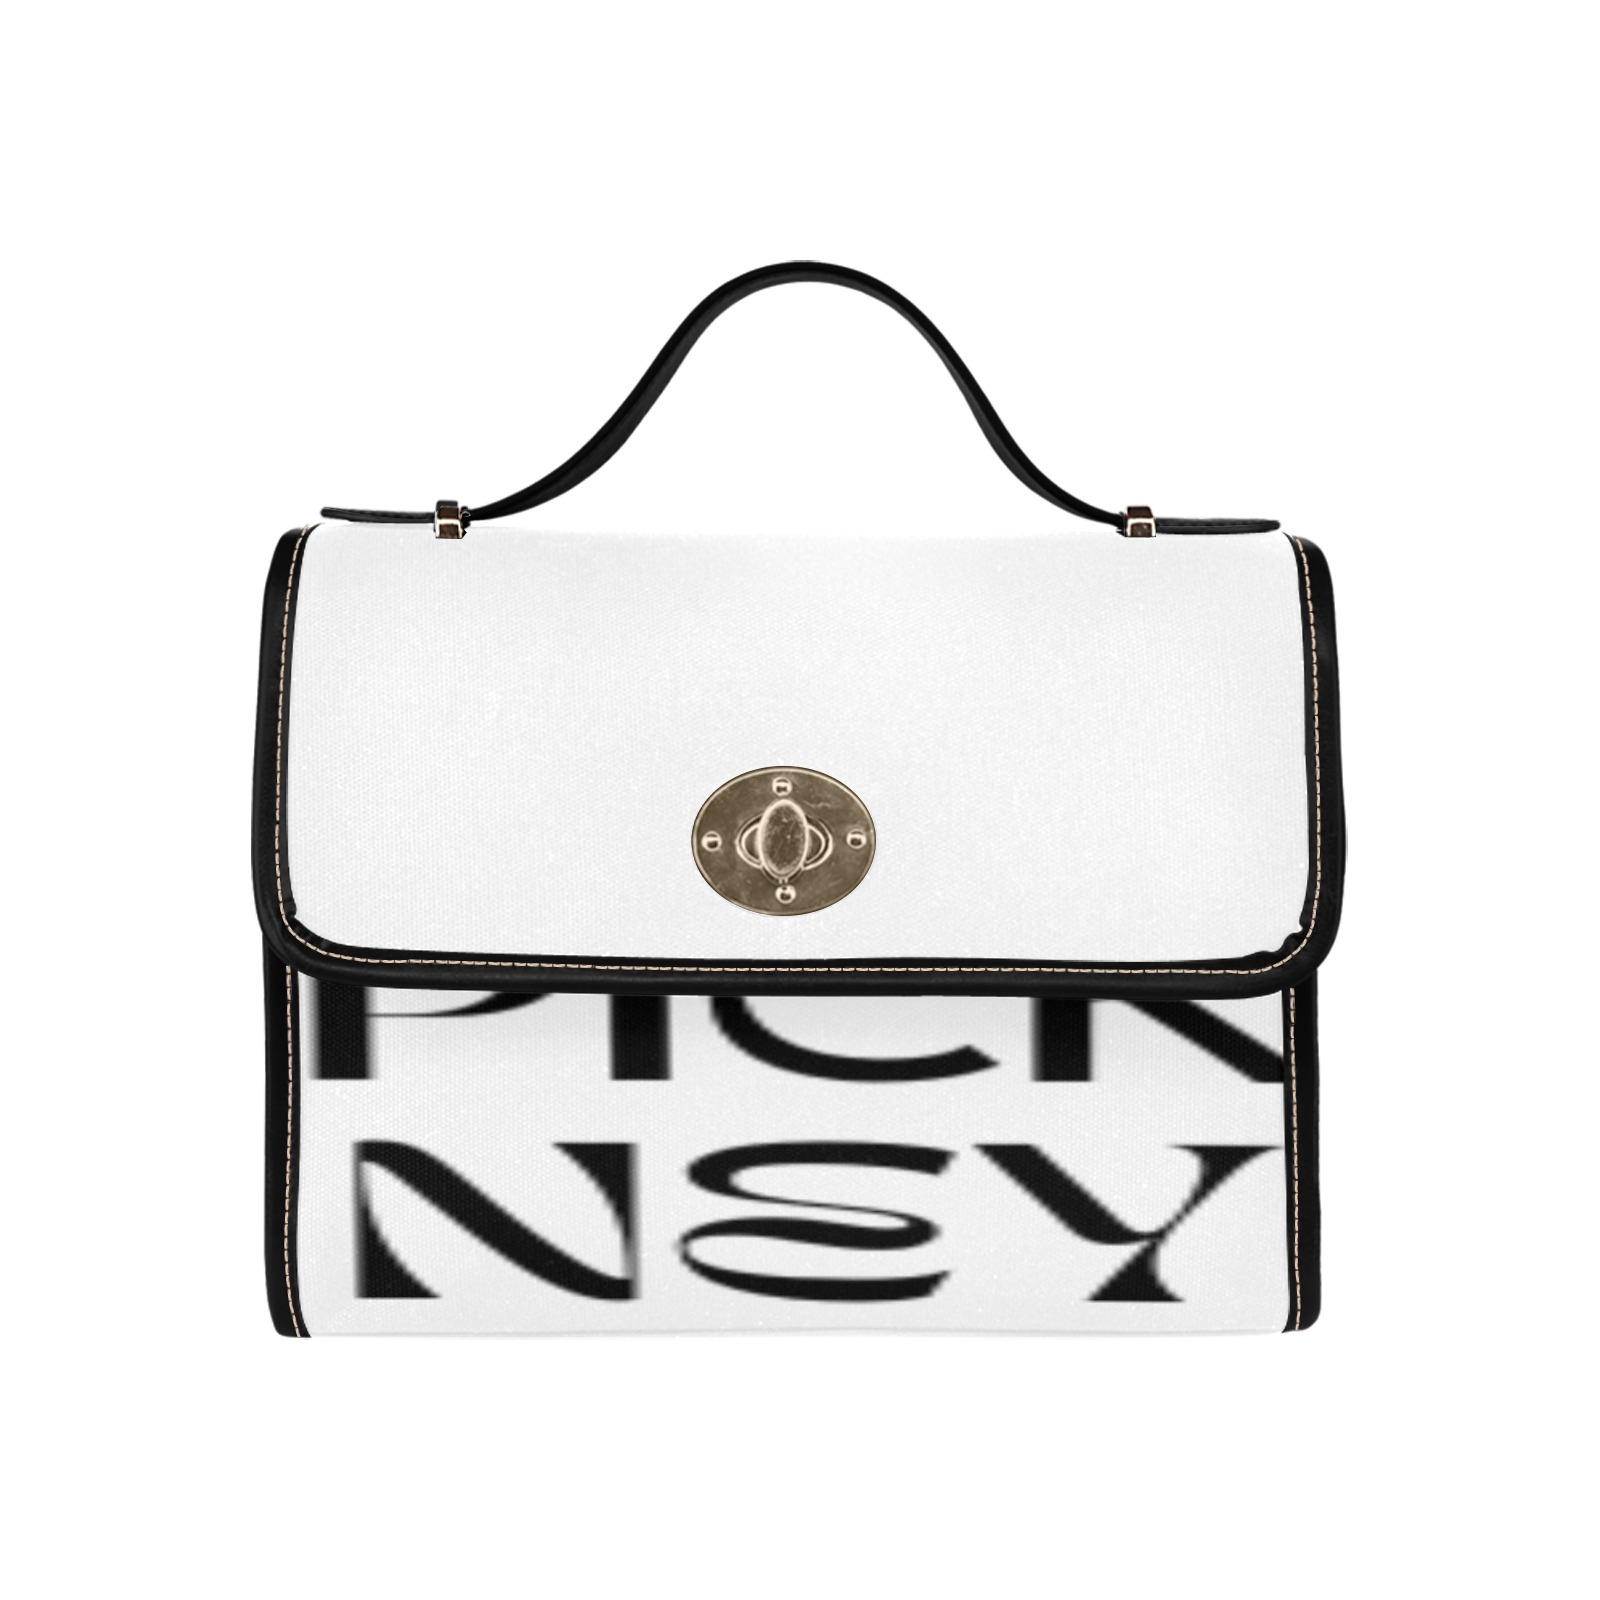 Pickney Tings Canvas Bag - Black and White Waterproof Canvas Bag-Black (All Over Print) (Model 1641)